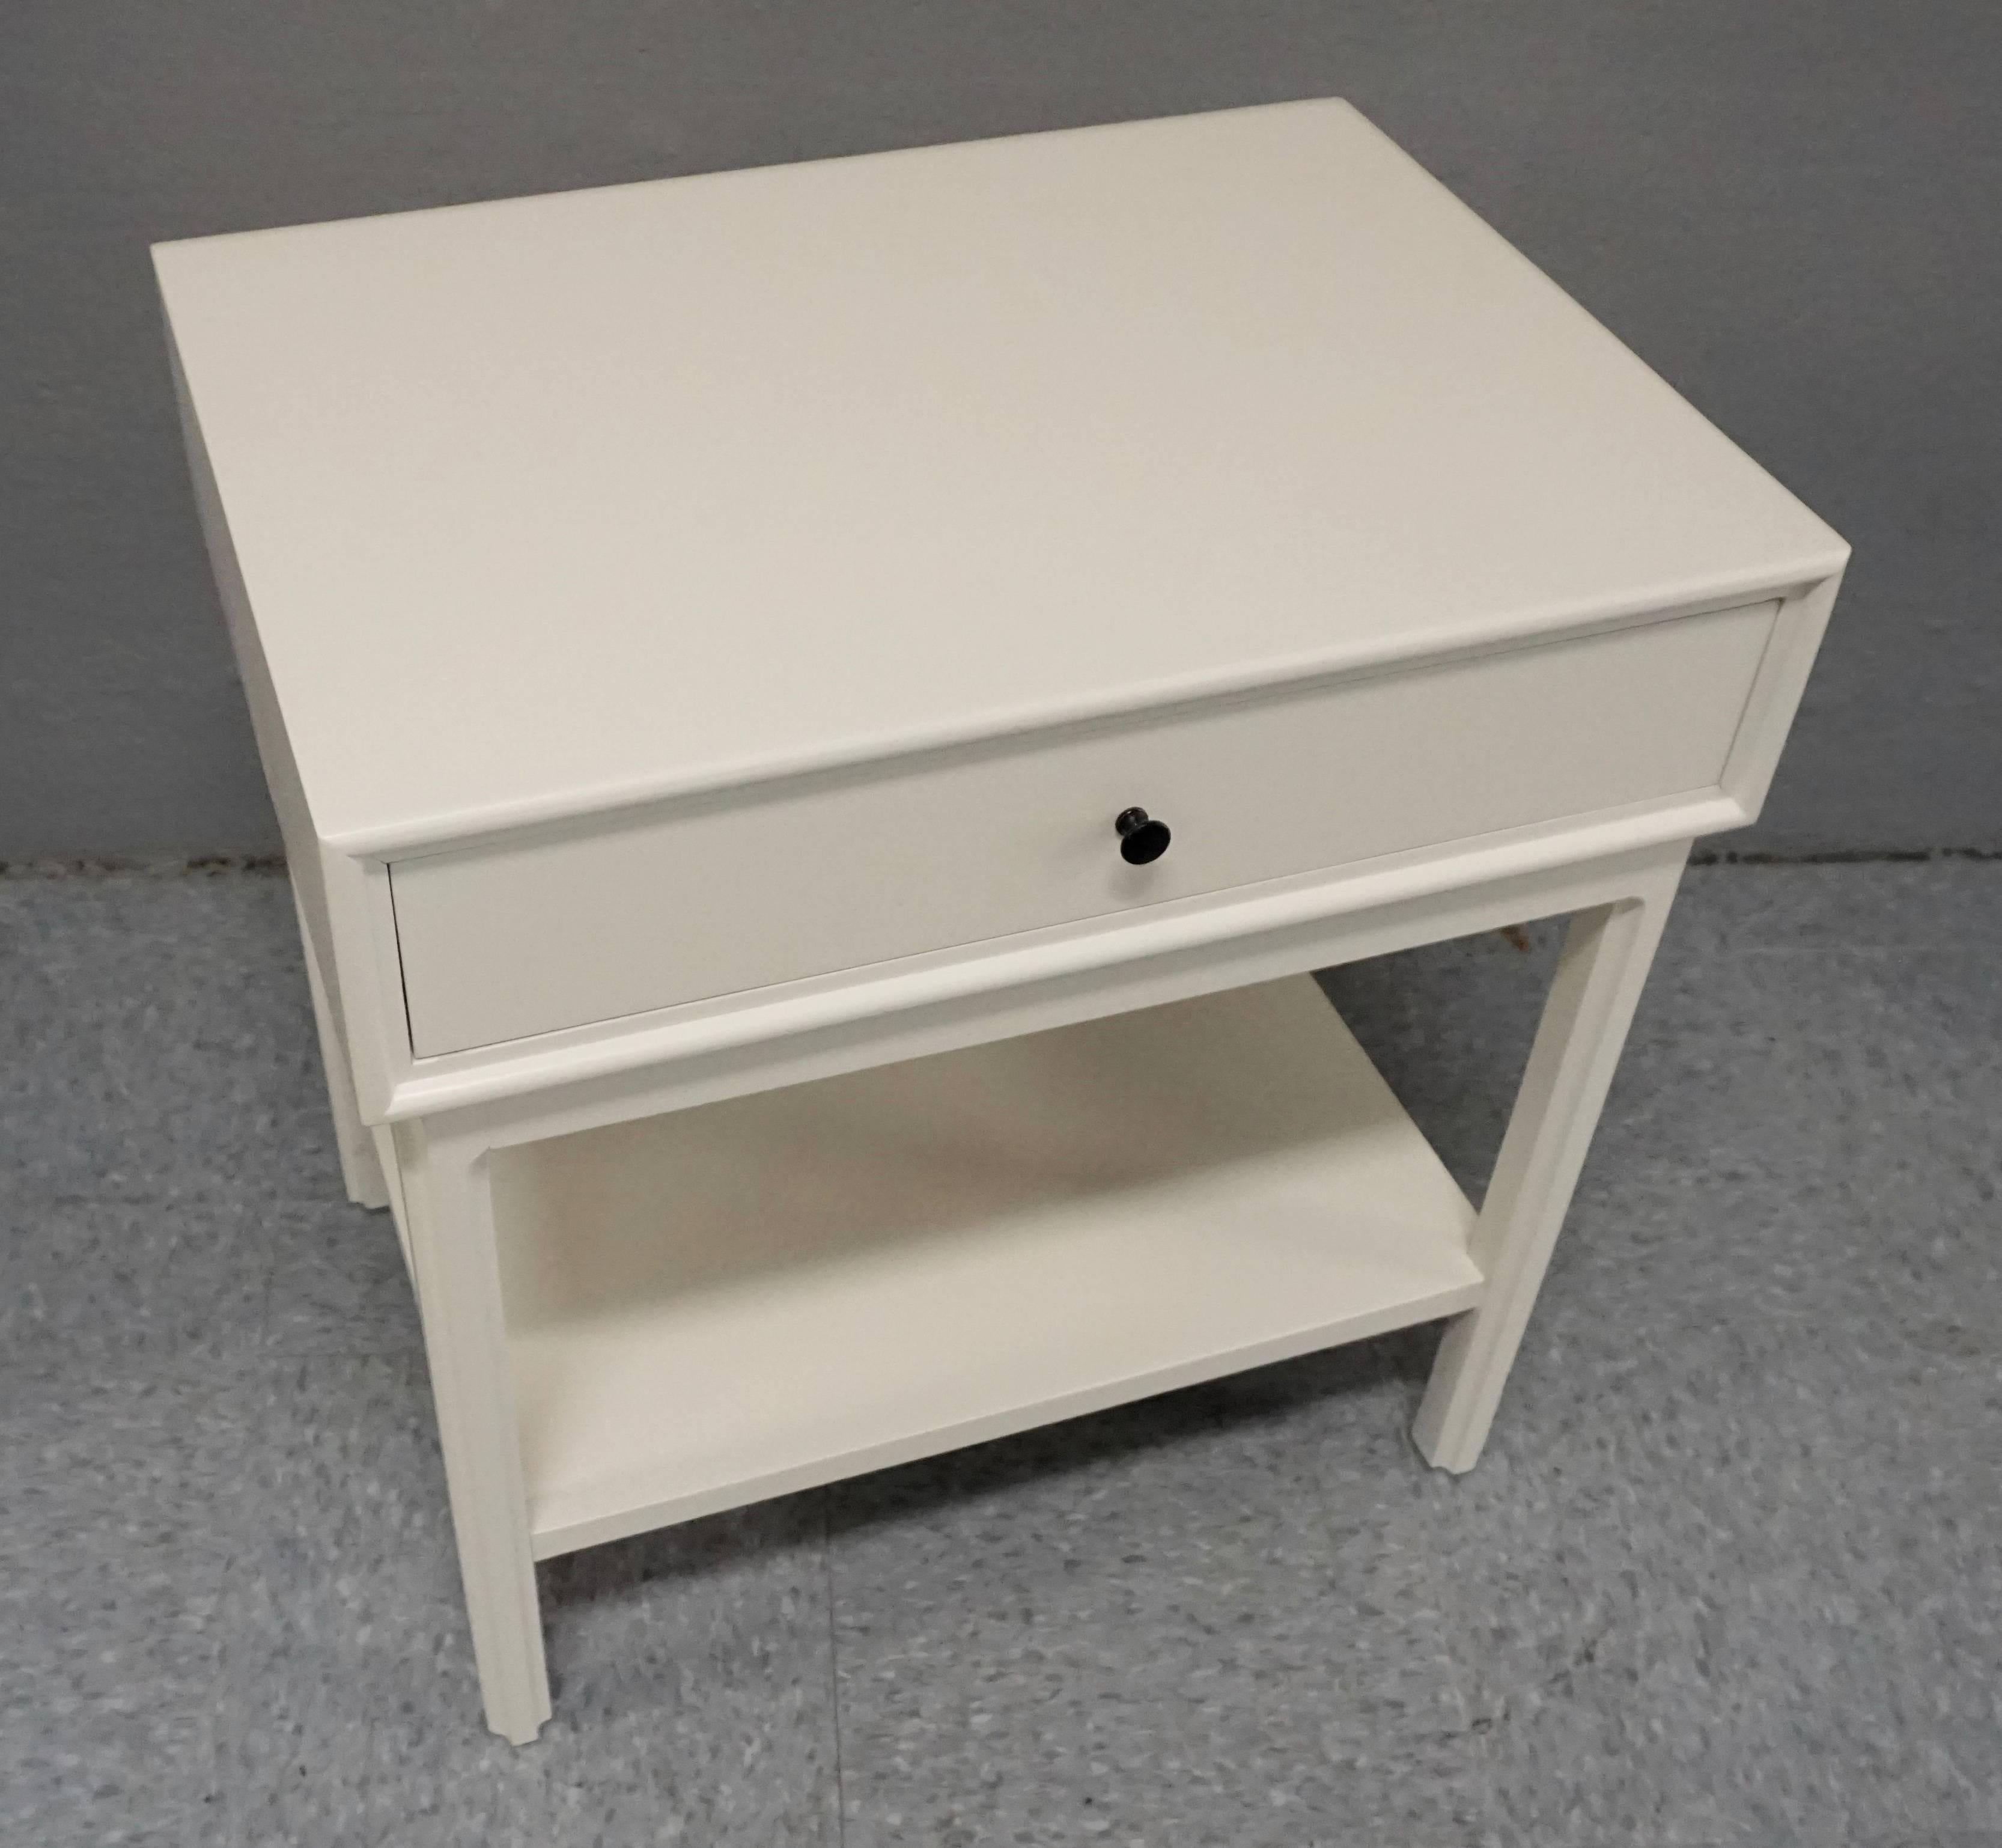 Fresh white lacquer. Heavy construction. Overall great condition, with a few scuffs under the painted surface. Black metal drawer pulls.